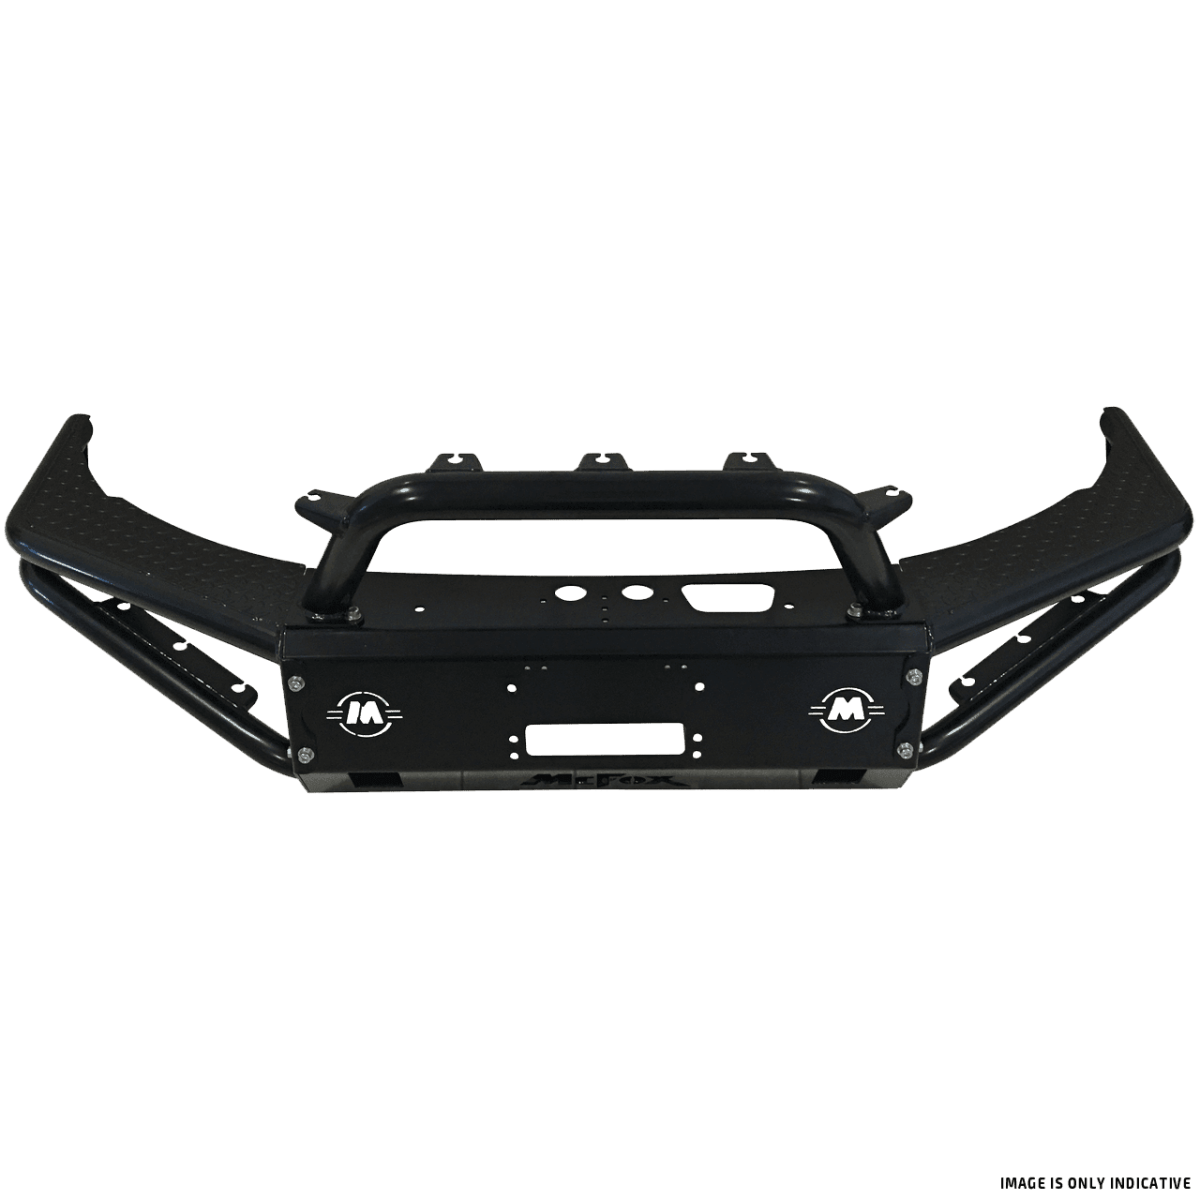 McArmor Tube Series 004 Winch Bar for Ford Ranger PX2 Wildtrak/Everest UA 2015-2019 (Adaptive Cruise Control Models) - NZ Offroader